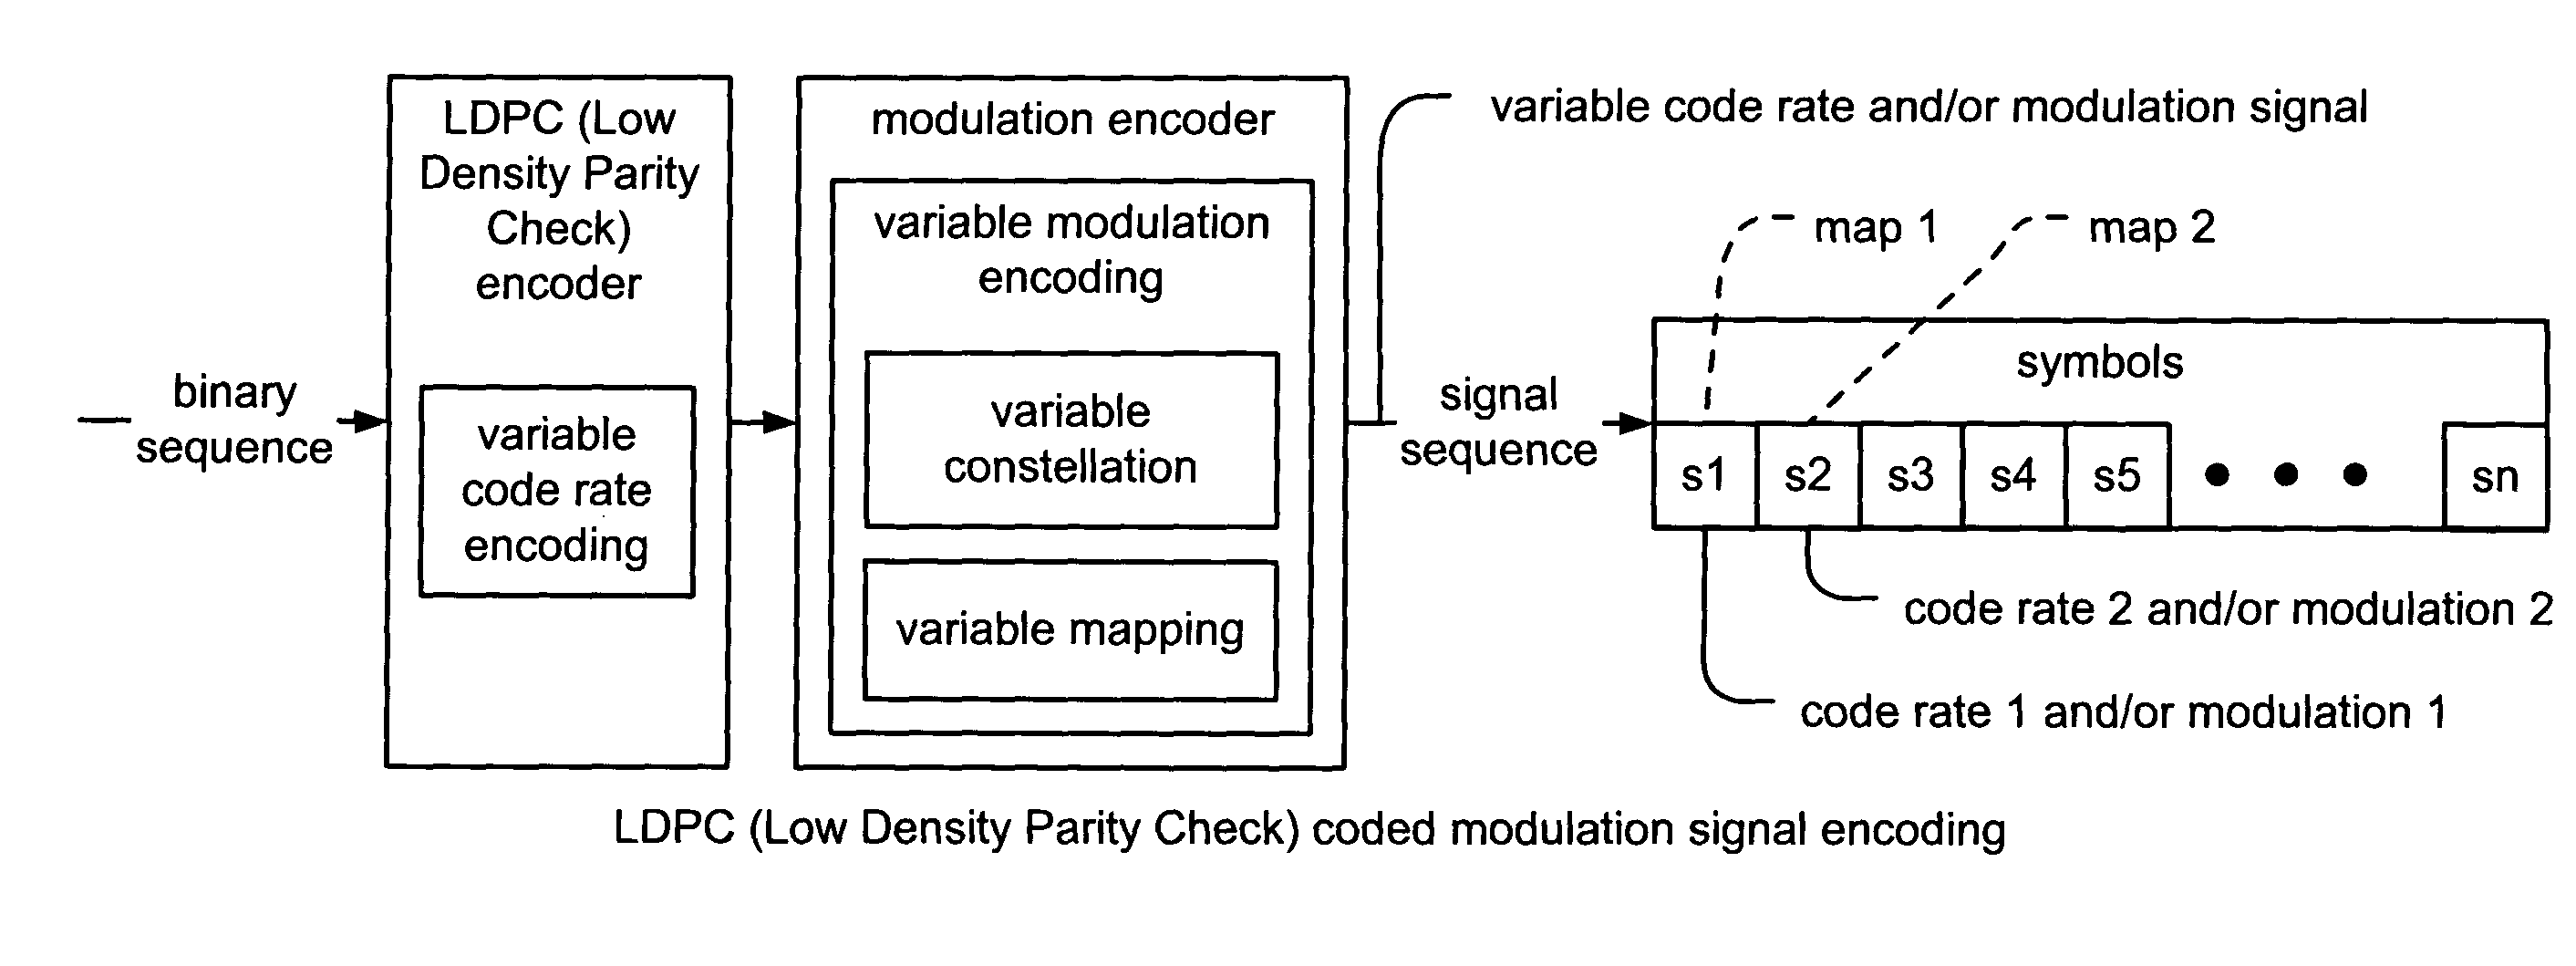 Variable modulation with LDPC (low density parity check) coding